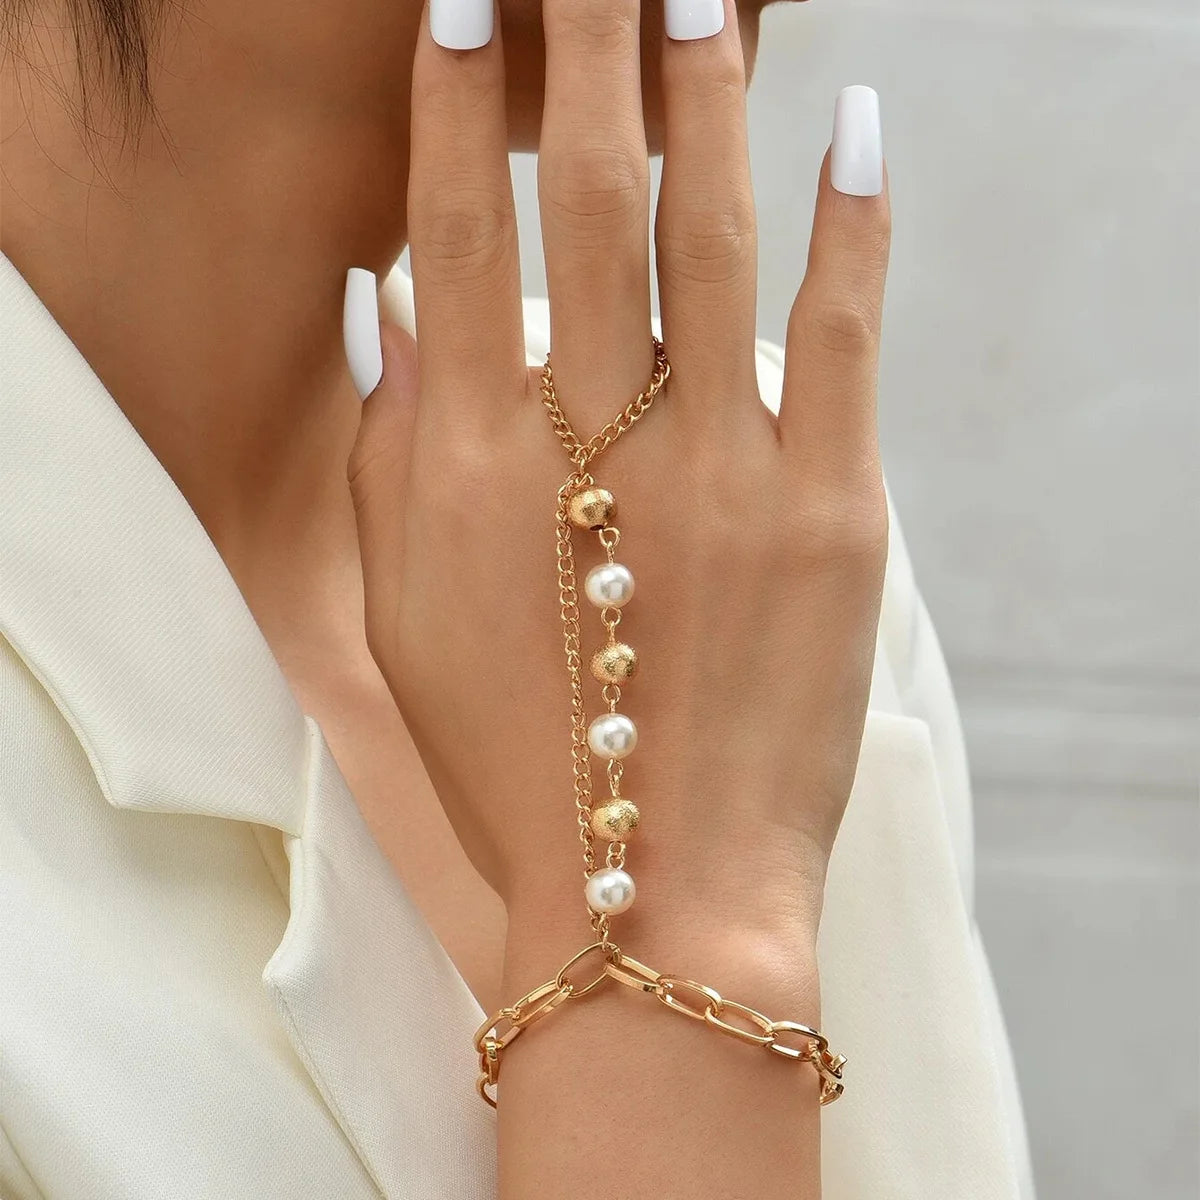 Gold Color Metal Imitation Pearl Beads Connected Bracelet